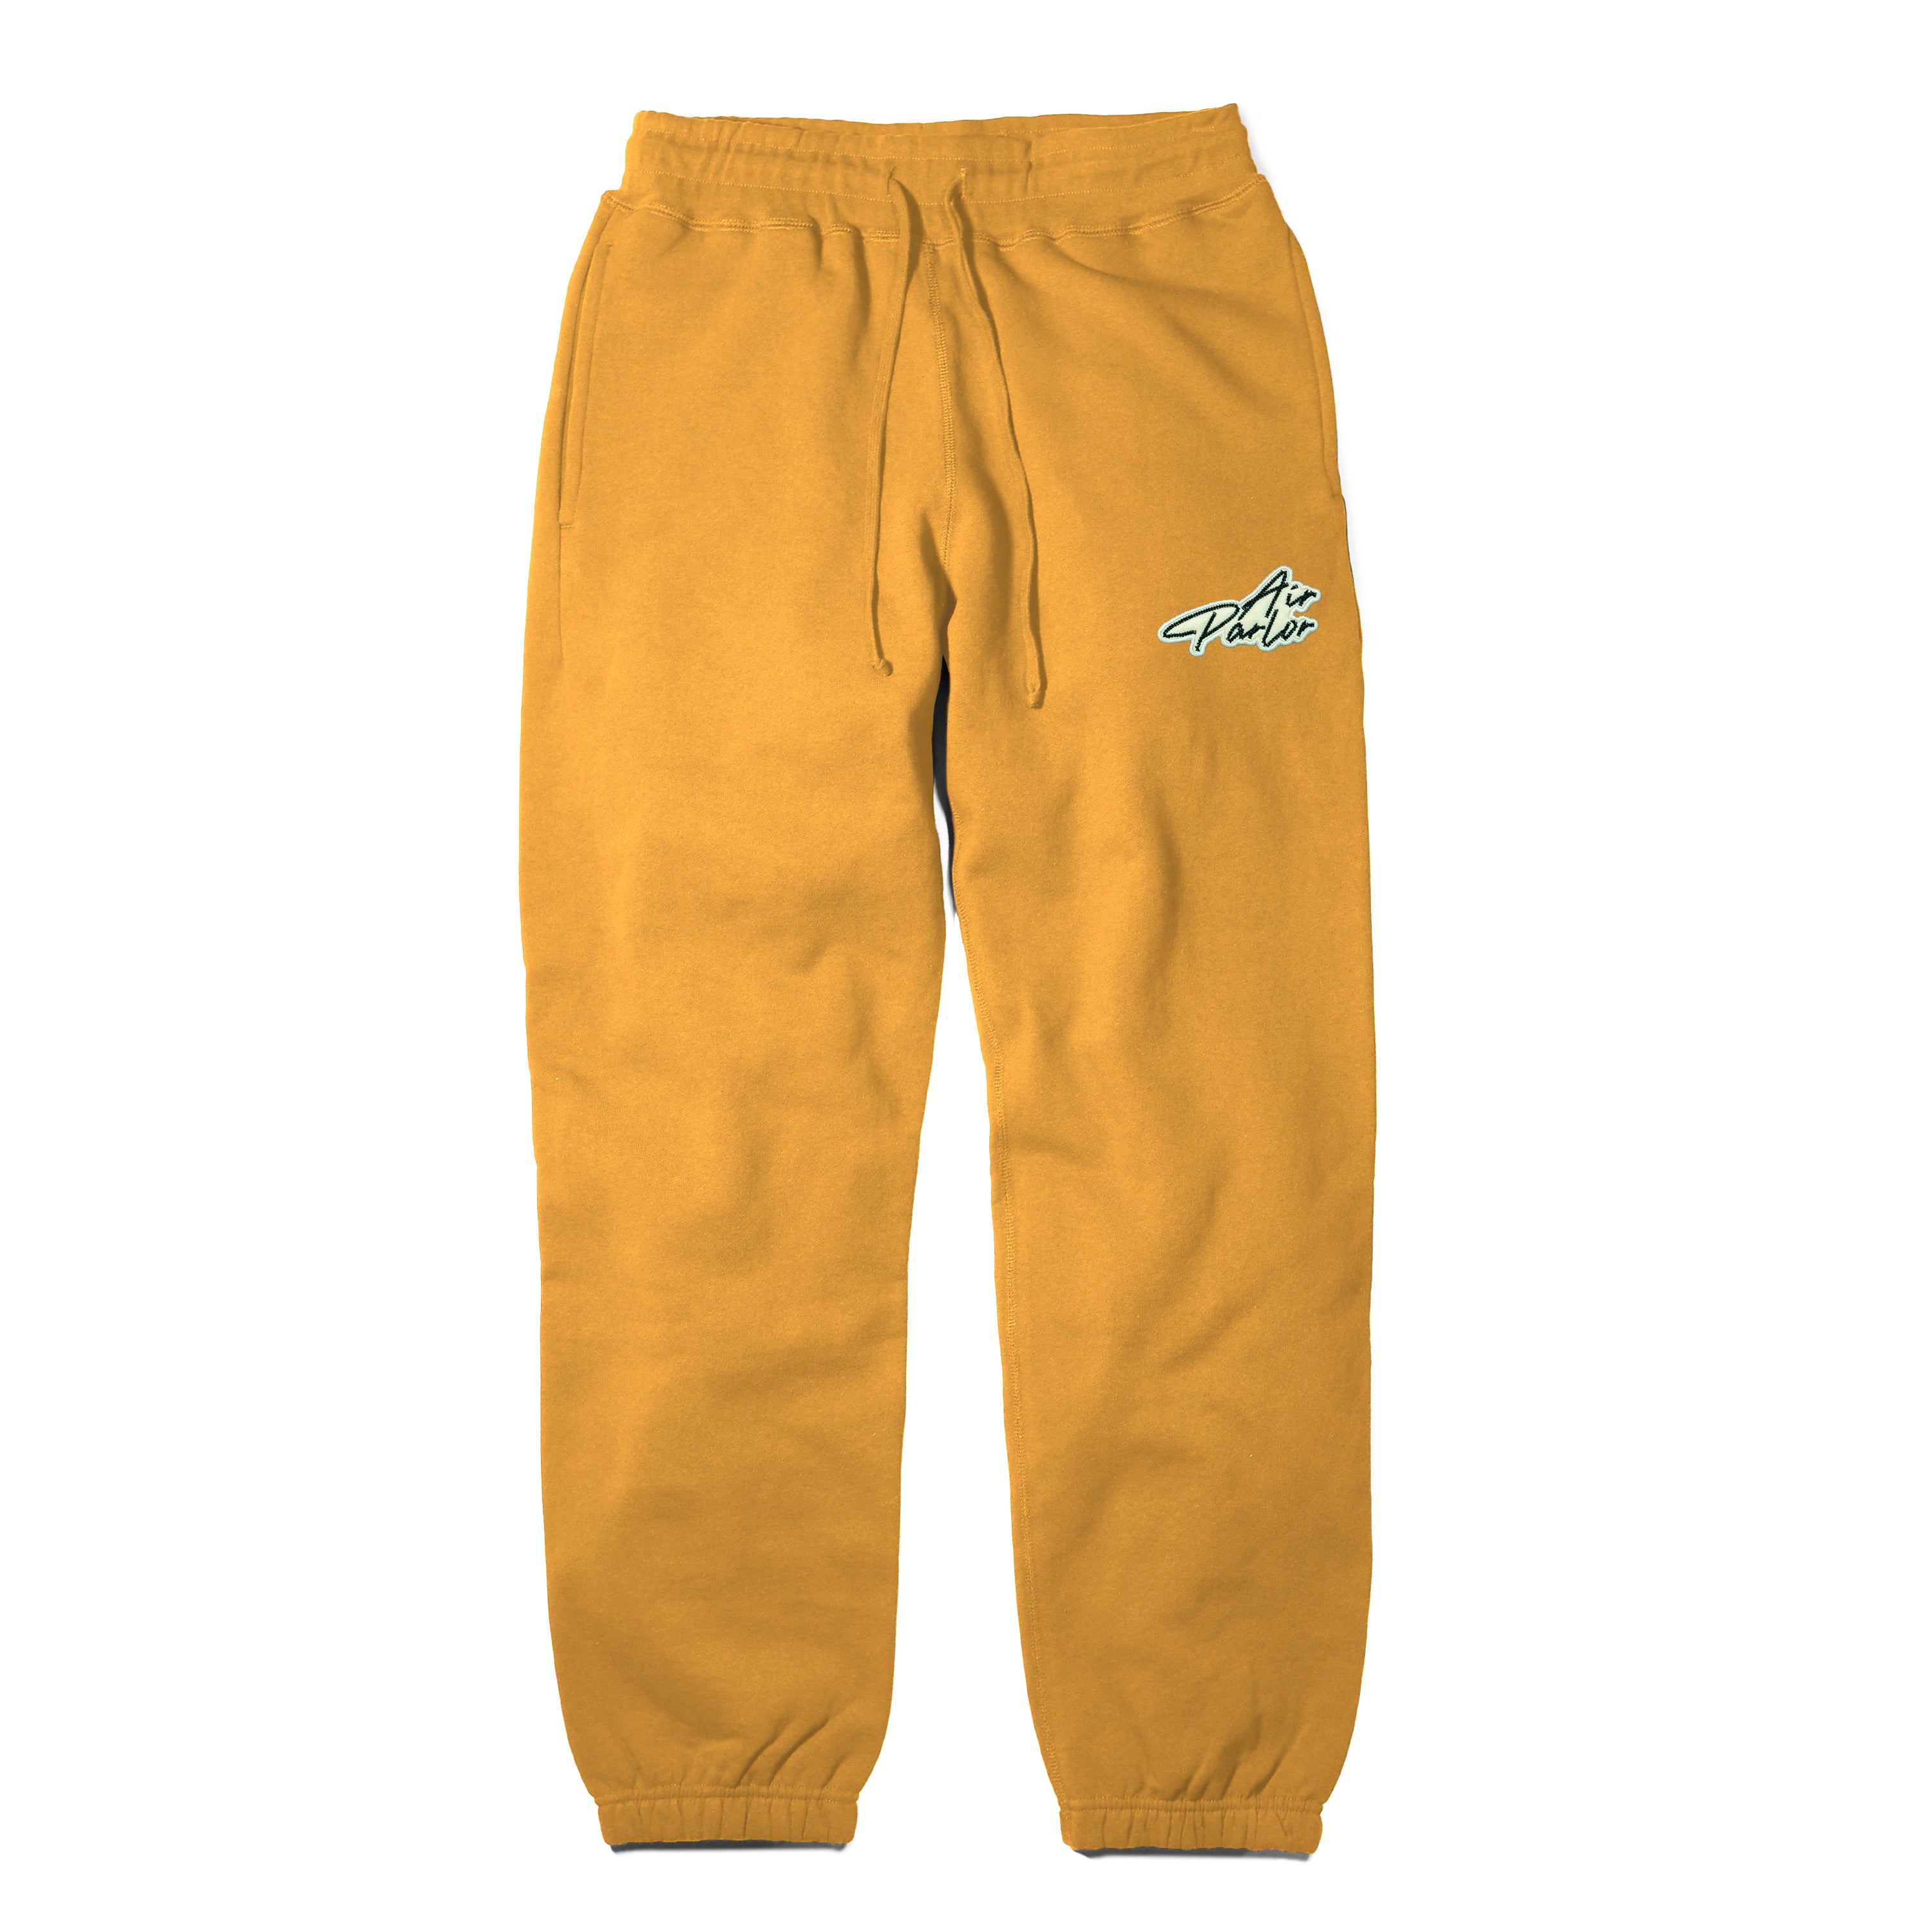 Parlor 23 "Air Parlor" Made In Canada Sweatpants